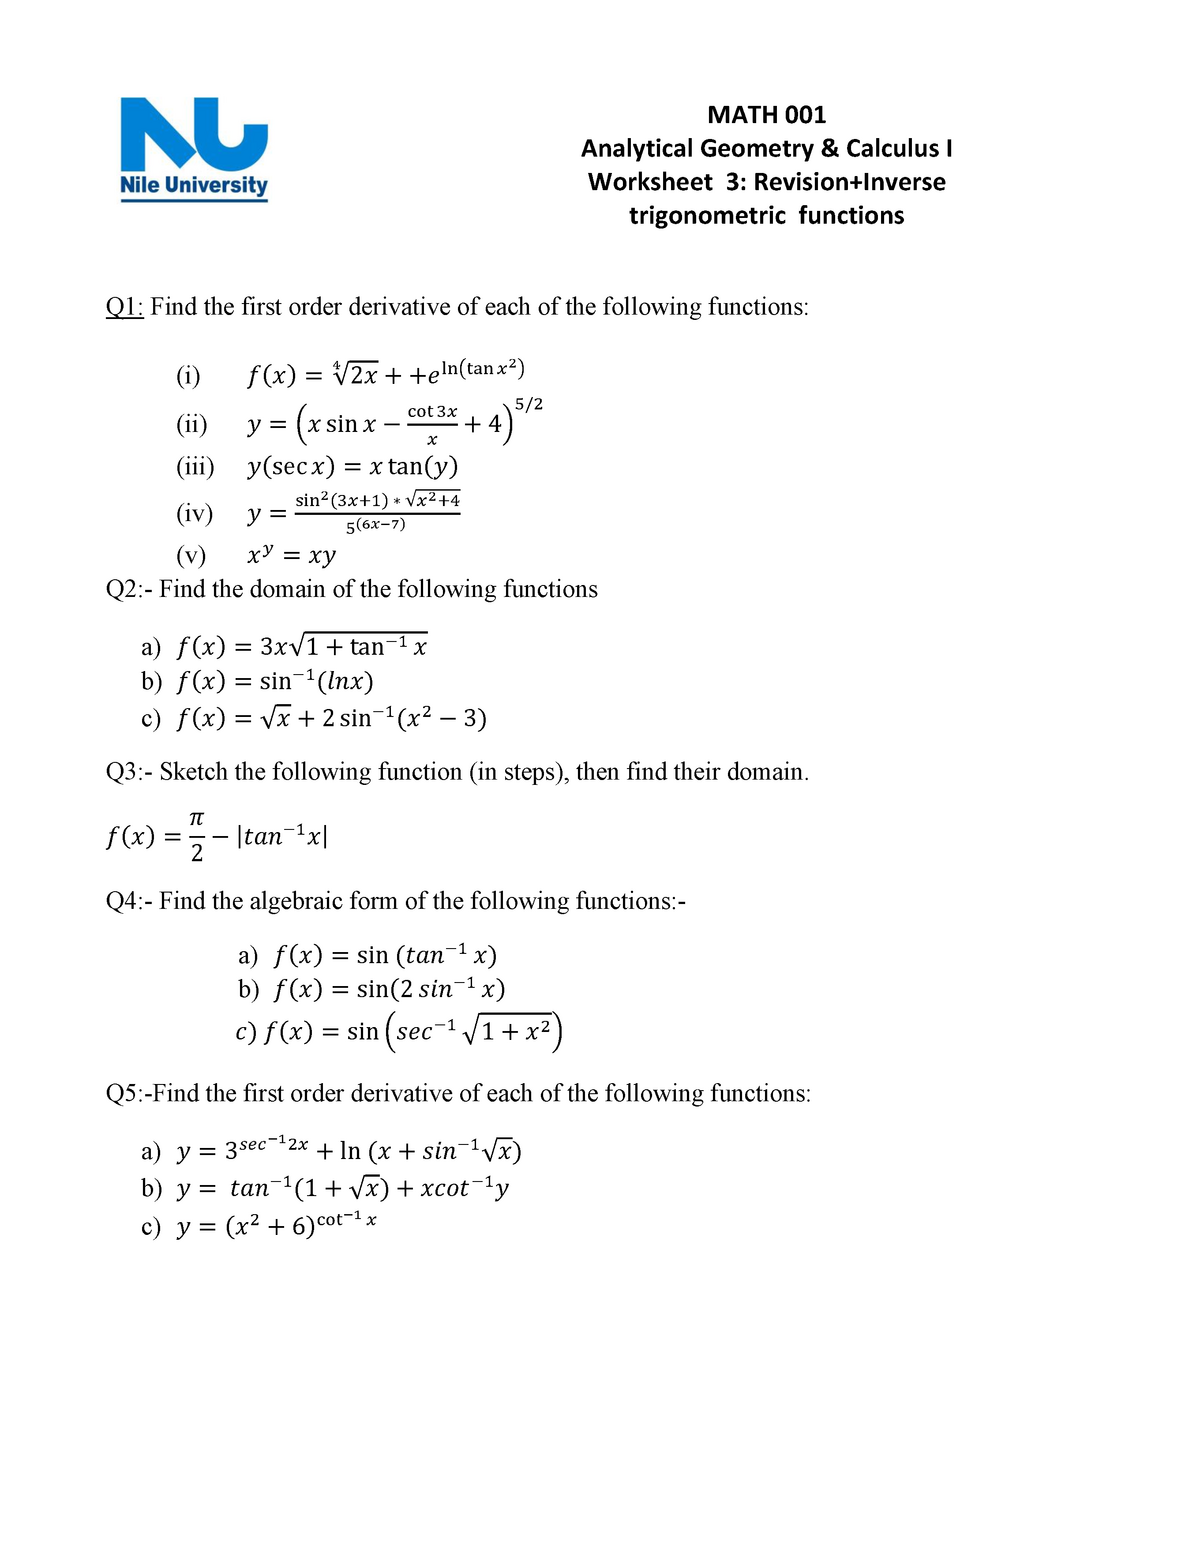 Math 22 Worksheet 22 - MATH 22 Analytical Geometry &amp; Calculus With Derivative Of Trigonometric Functions Worksheet